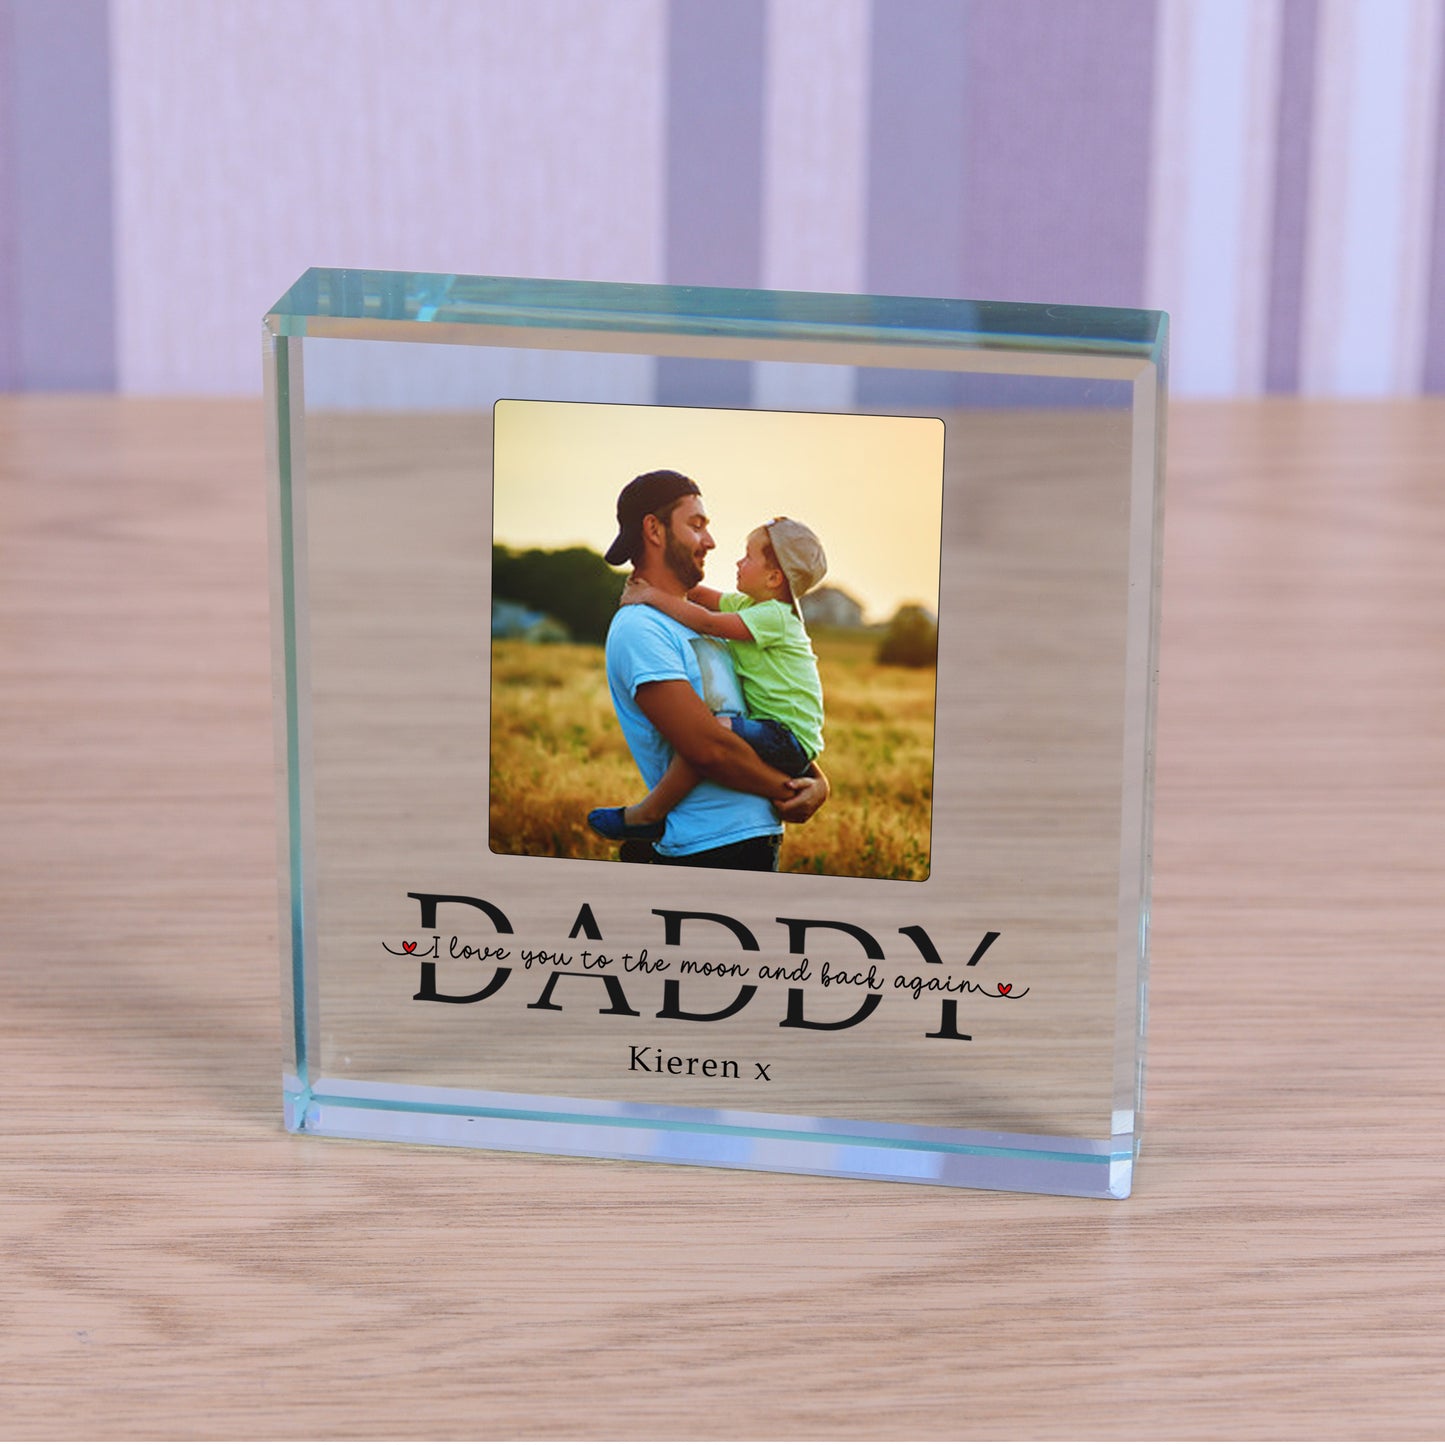 Personalised Photo Glass Token - DADDY